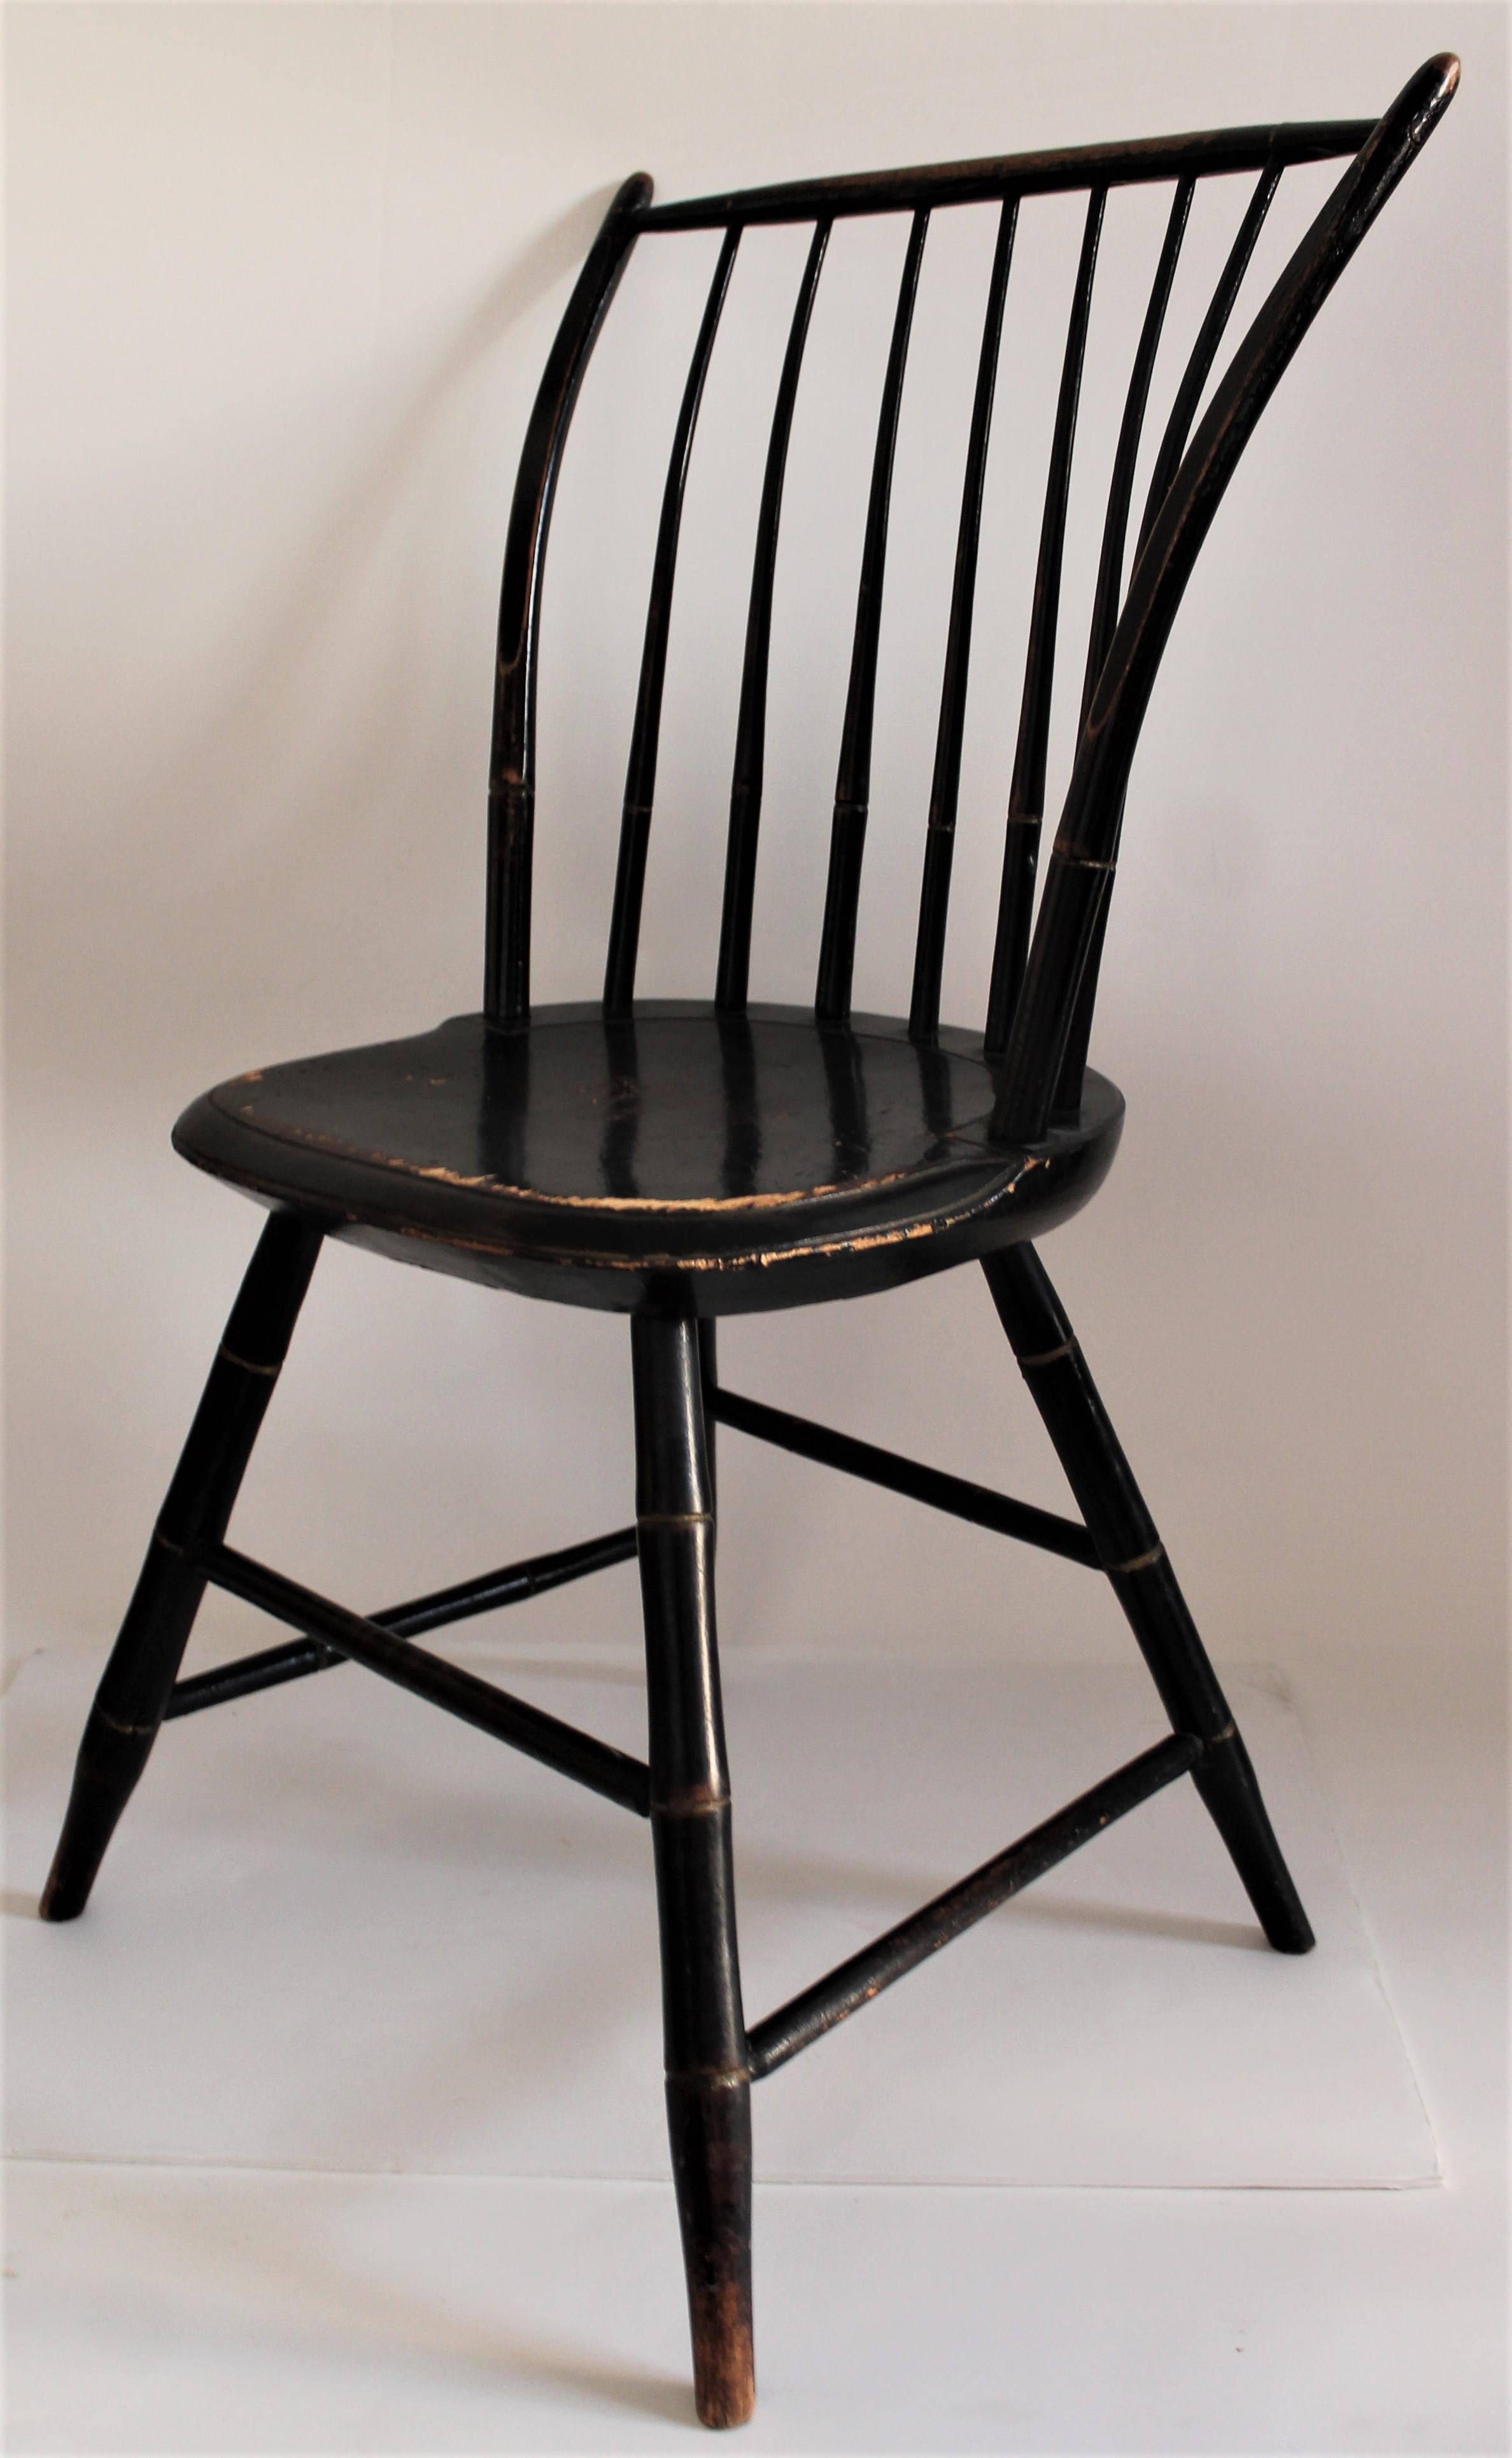 Country Early 19th Century Windsor Chair in Original Black Paint For Sale